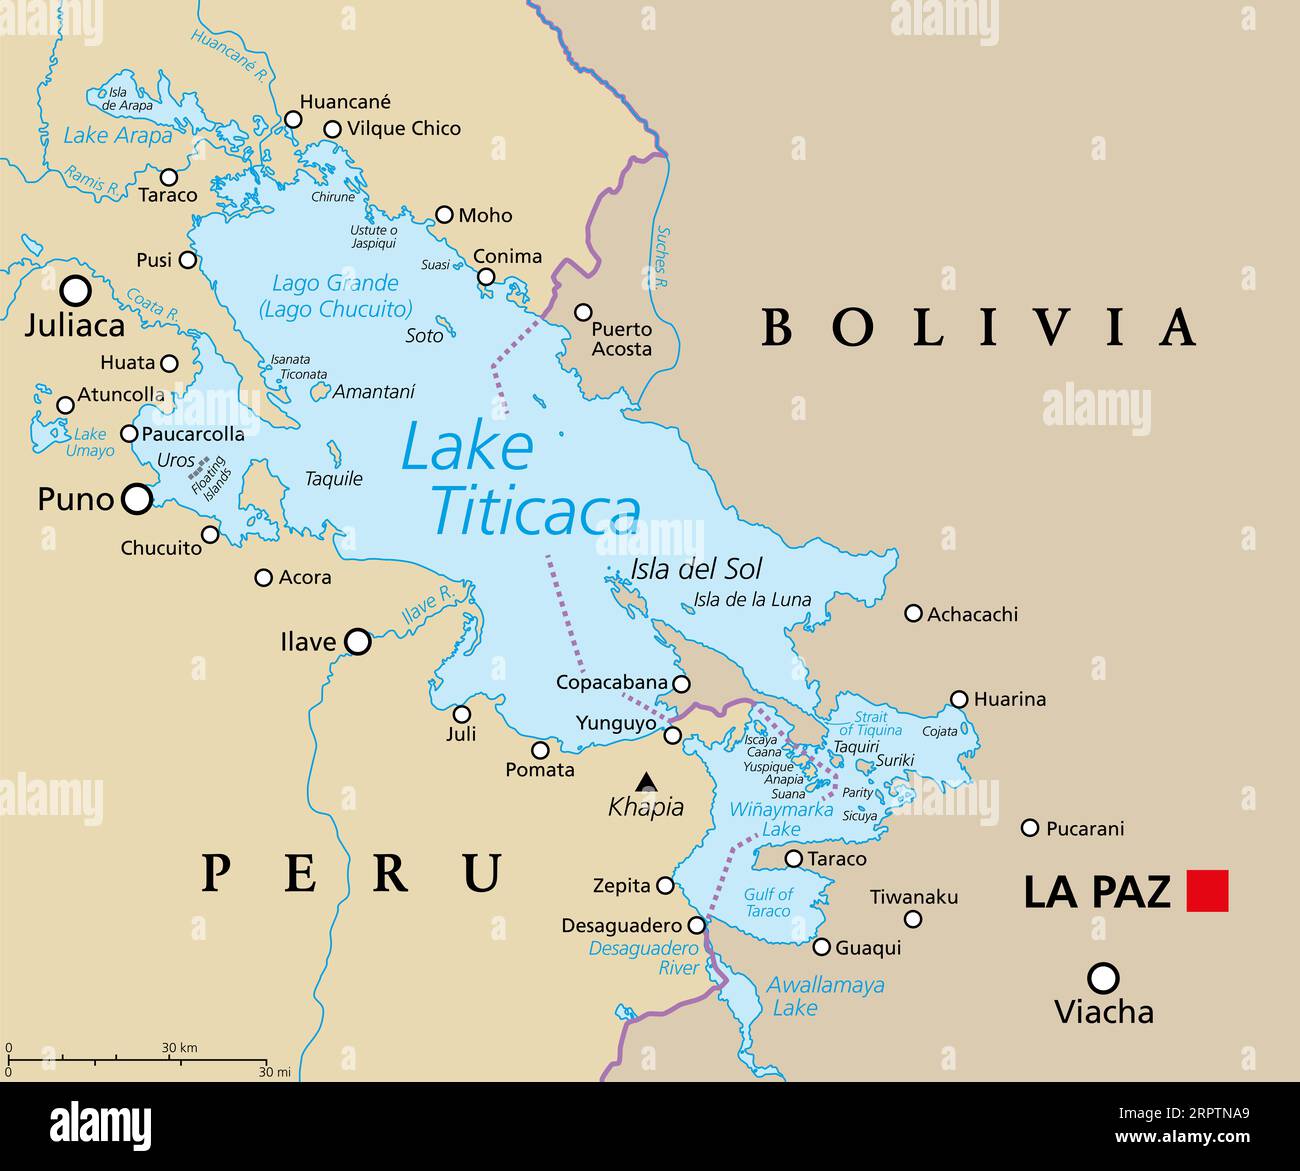 Lake Titicaca, political map. Large freshwater lake in the Andes mountains on the border of Bolivia and Peru. Often called the highest navigable lake. Stock Photo